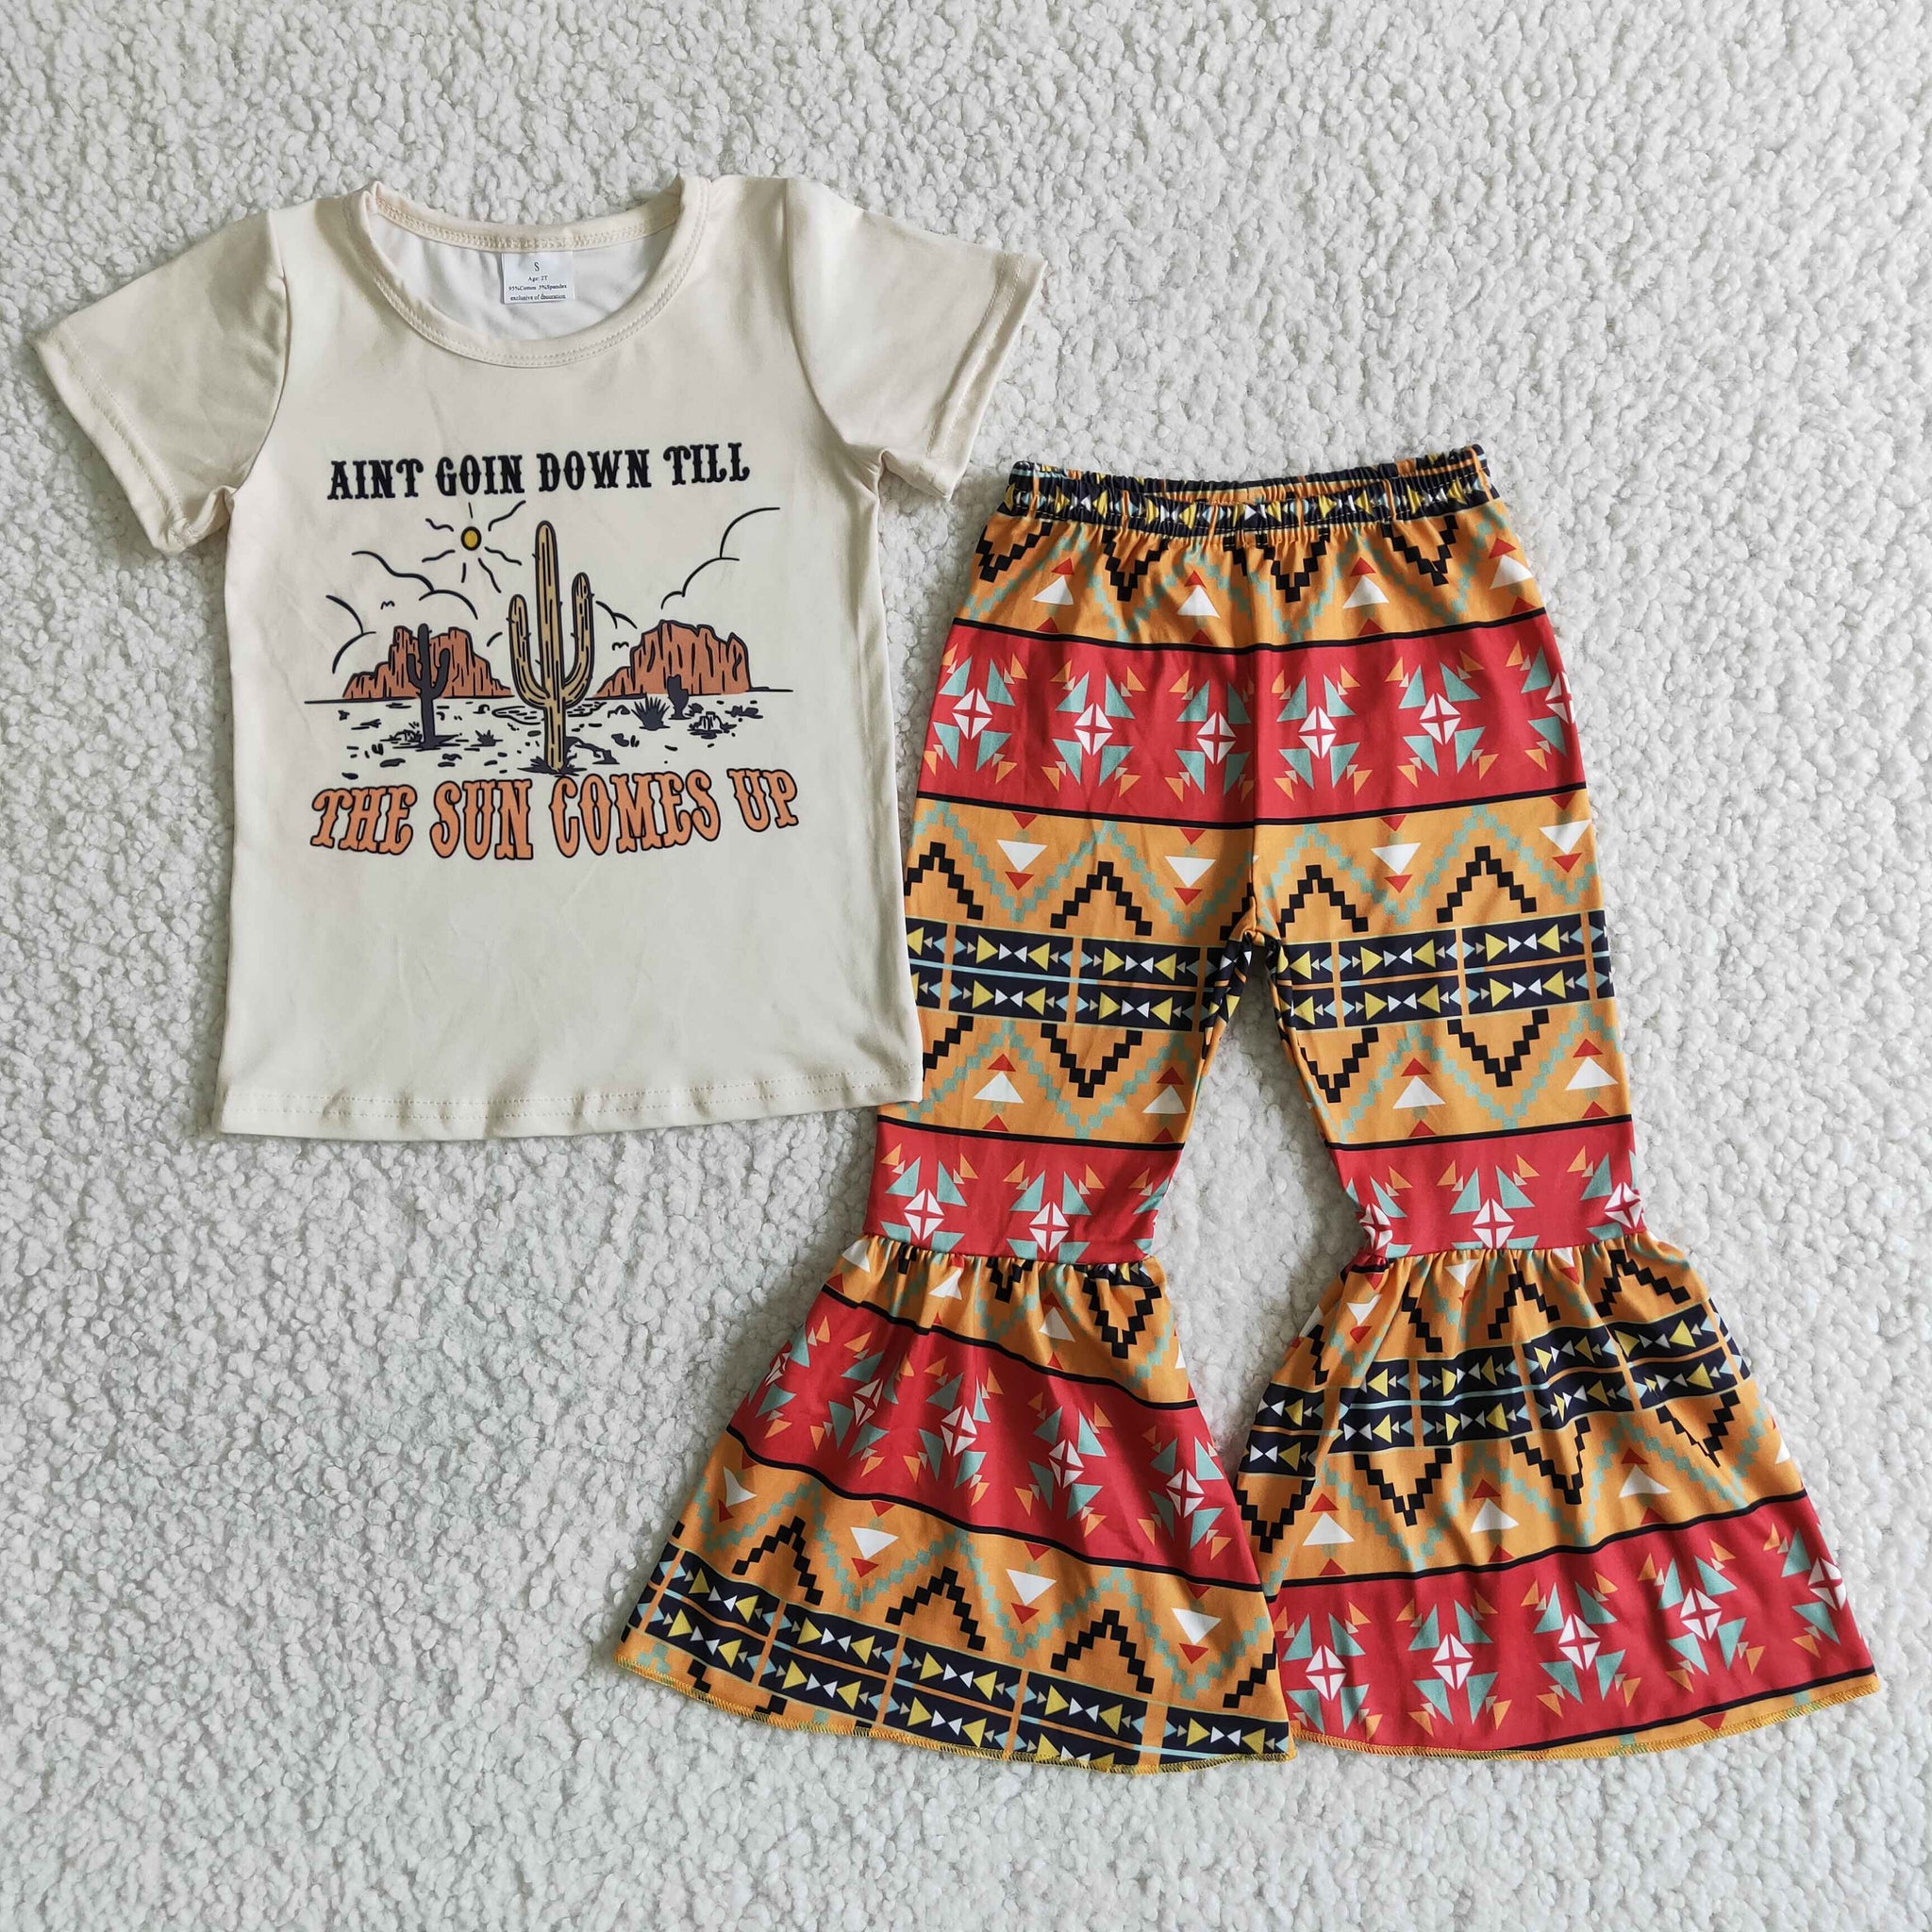 B14-28 girls clothes the sun comes up fall spring short sleeve set